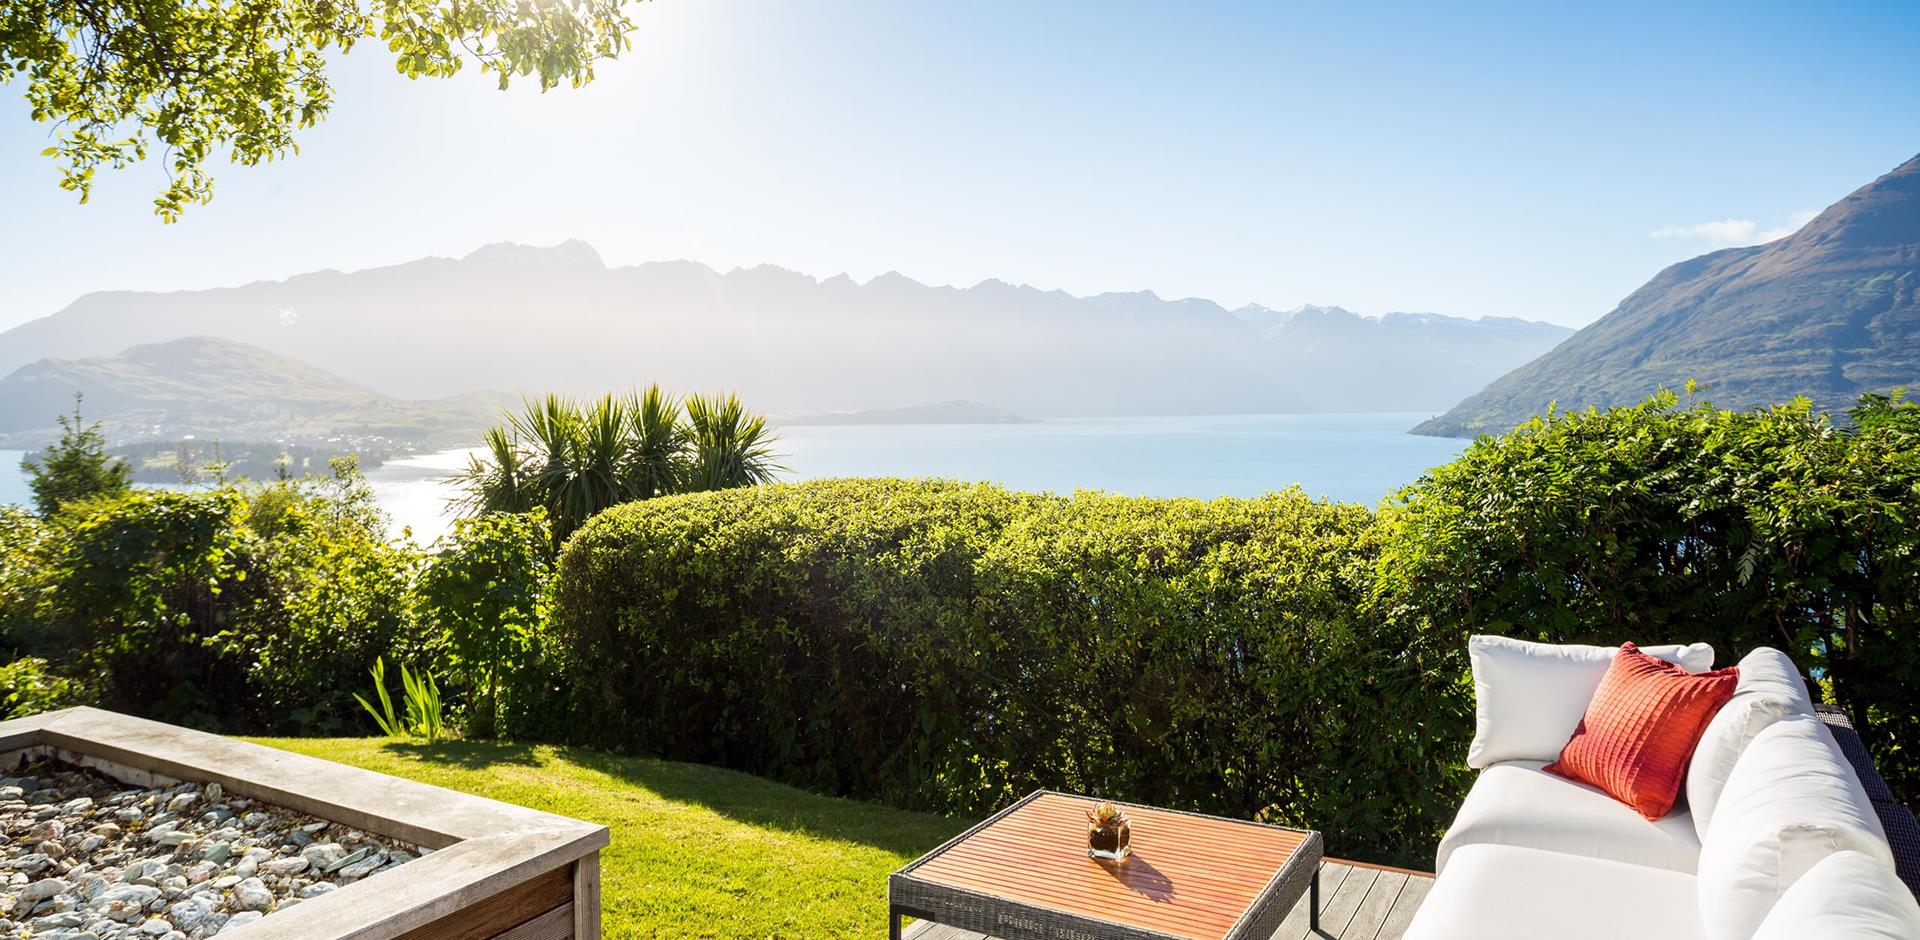 Outdoor lounge view, Azur Lodge, New Zealand